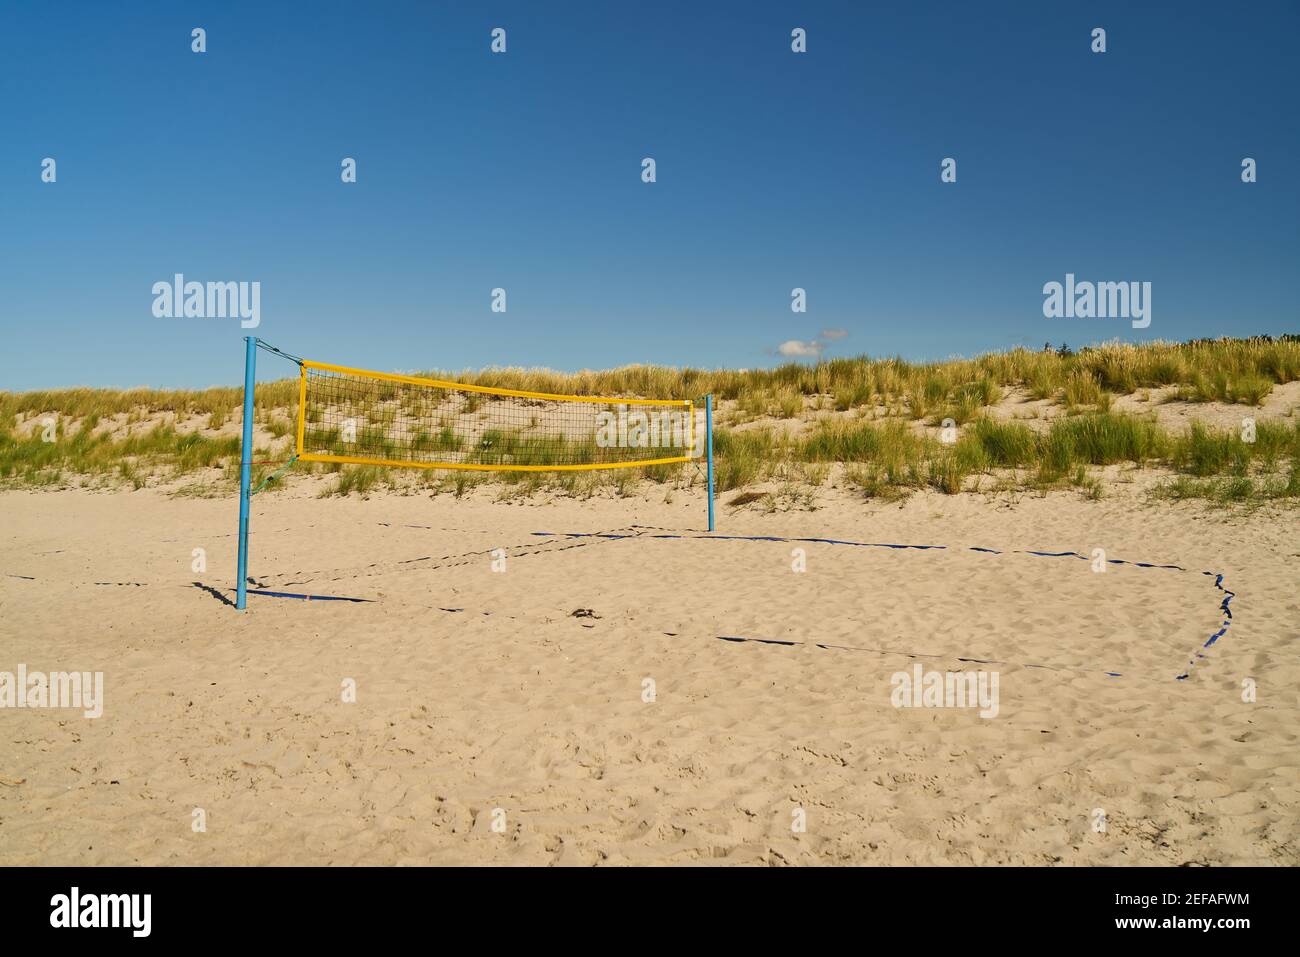 Playing field for volleyball with net on the beach against a blue sky in summer Stock Photo